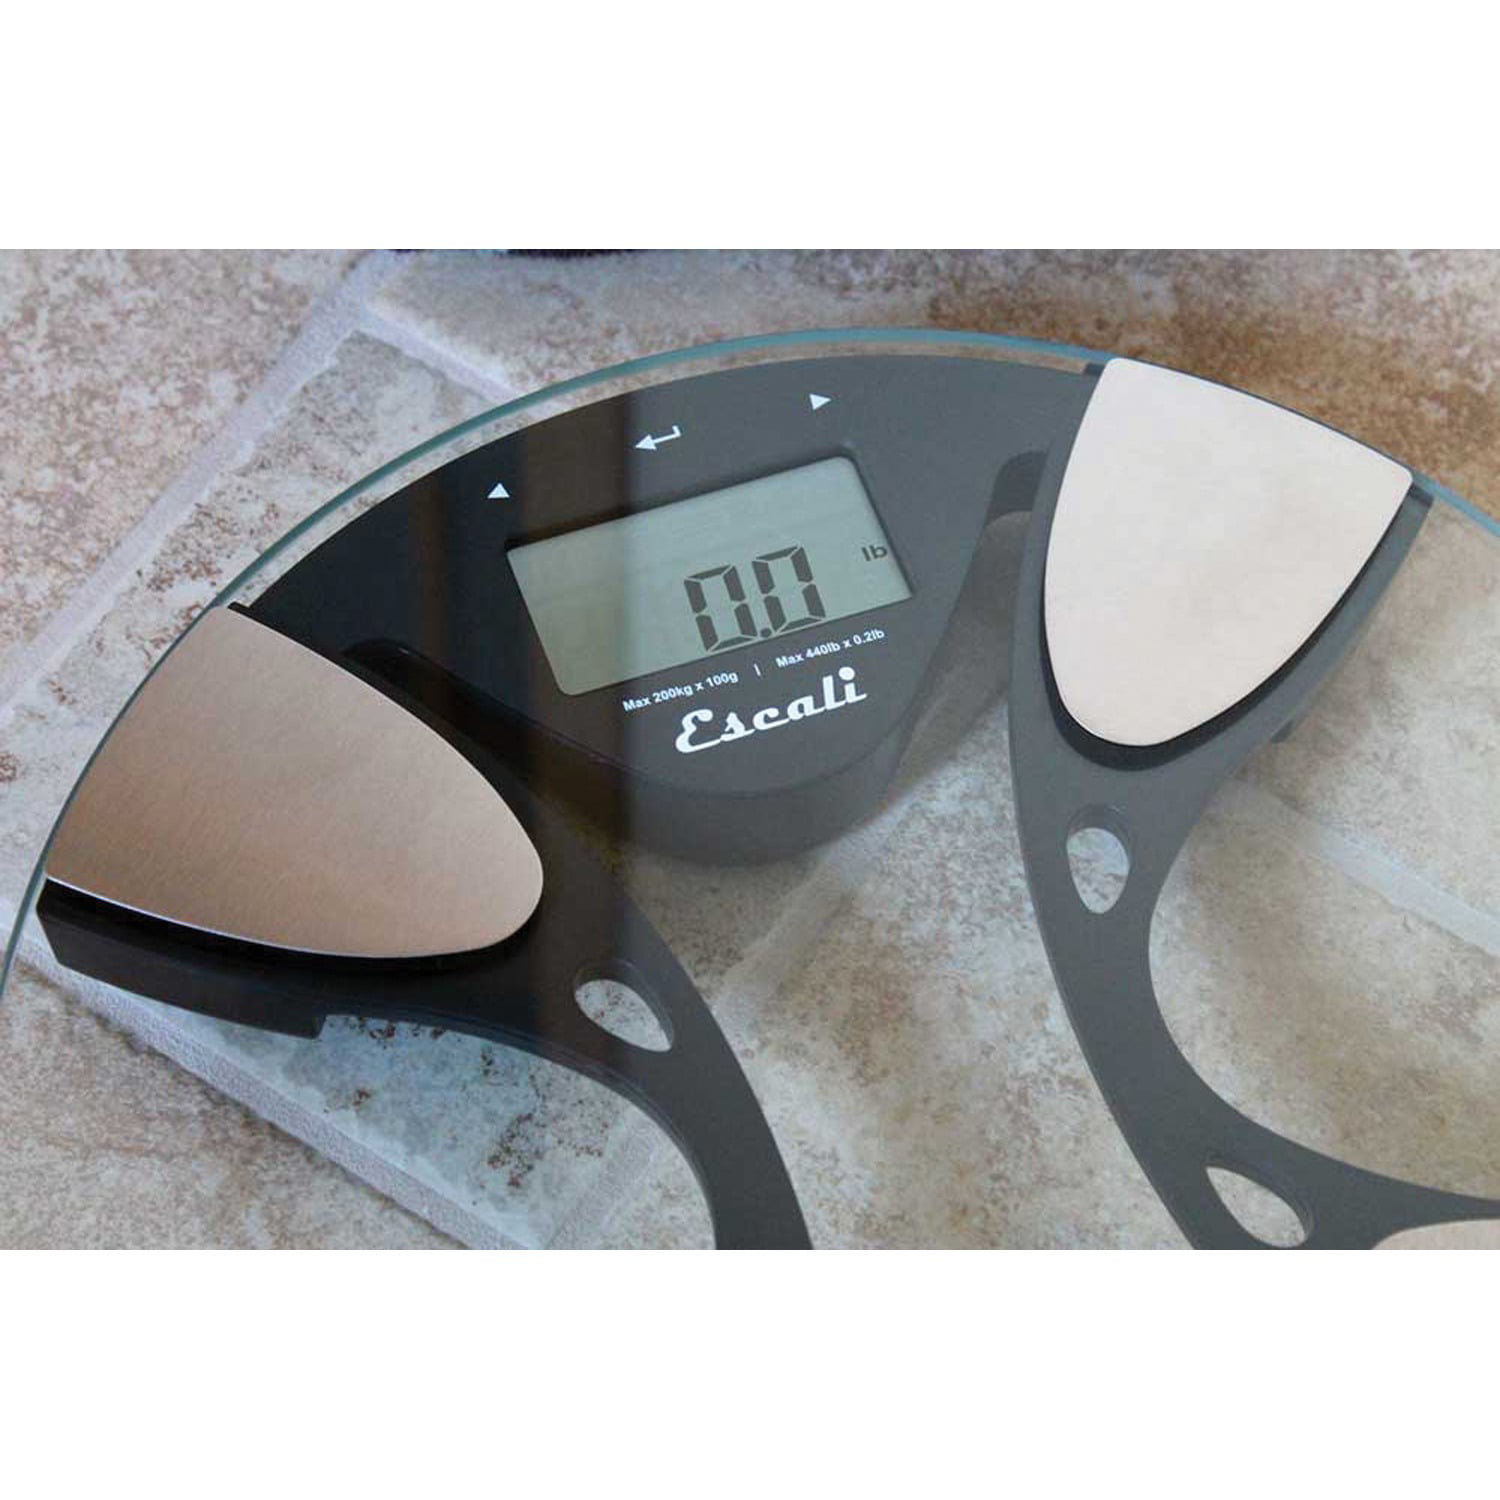 Escali BFBW200 Advanced Bioelectrical Impedance Analysis (BIA) Technology  Calculates Body Fat/Water Percentages, Bathroom Scale, LCD Digital Display